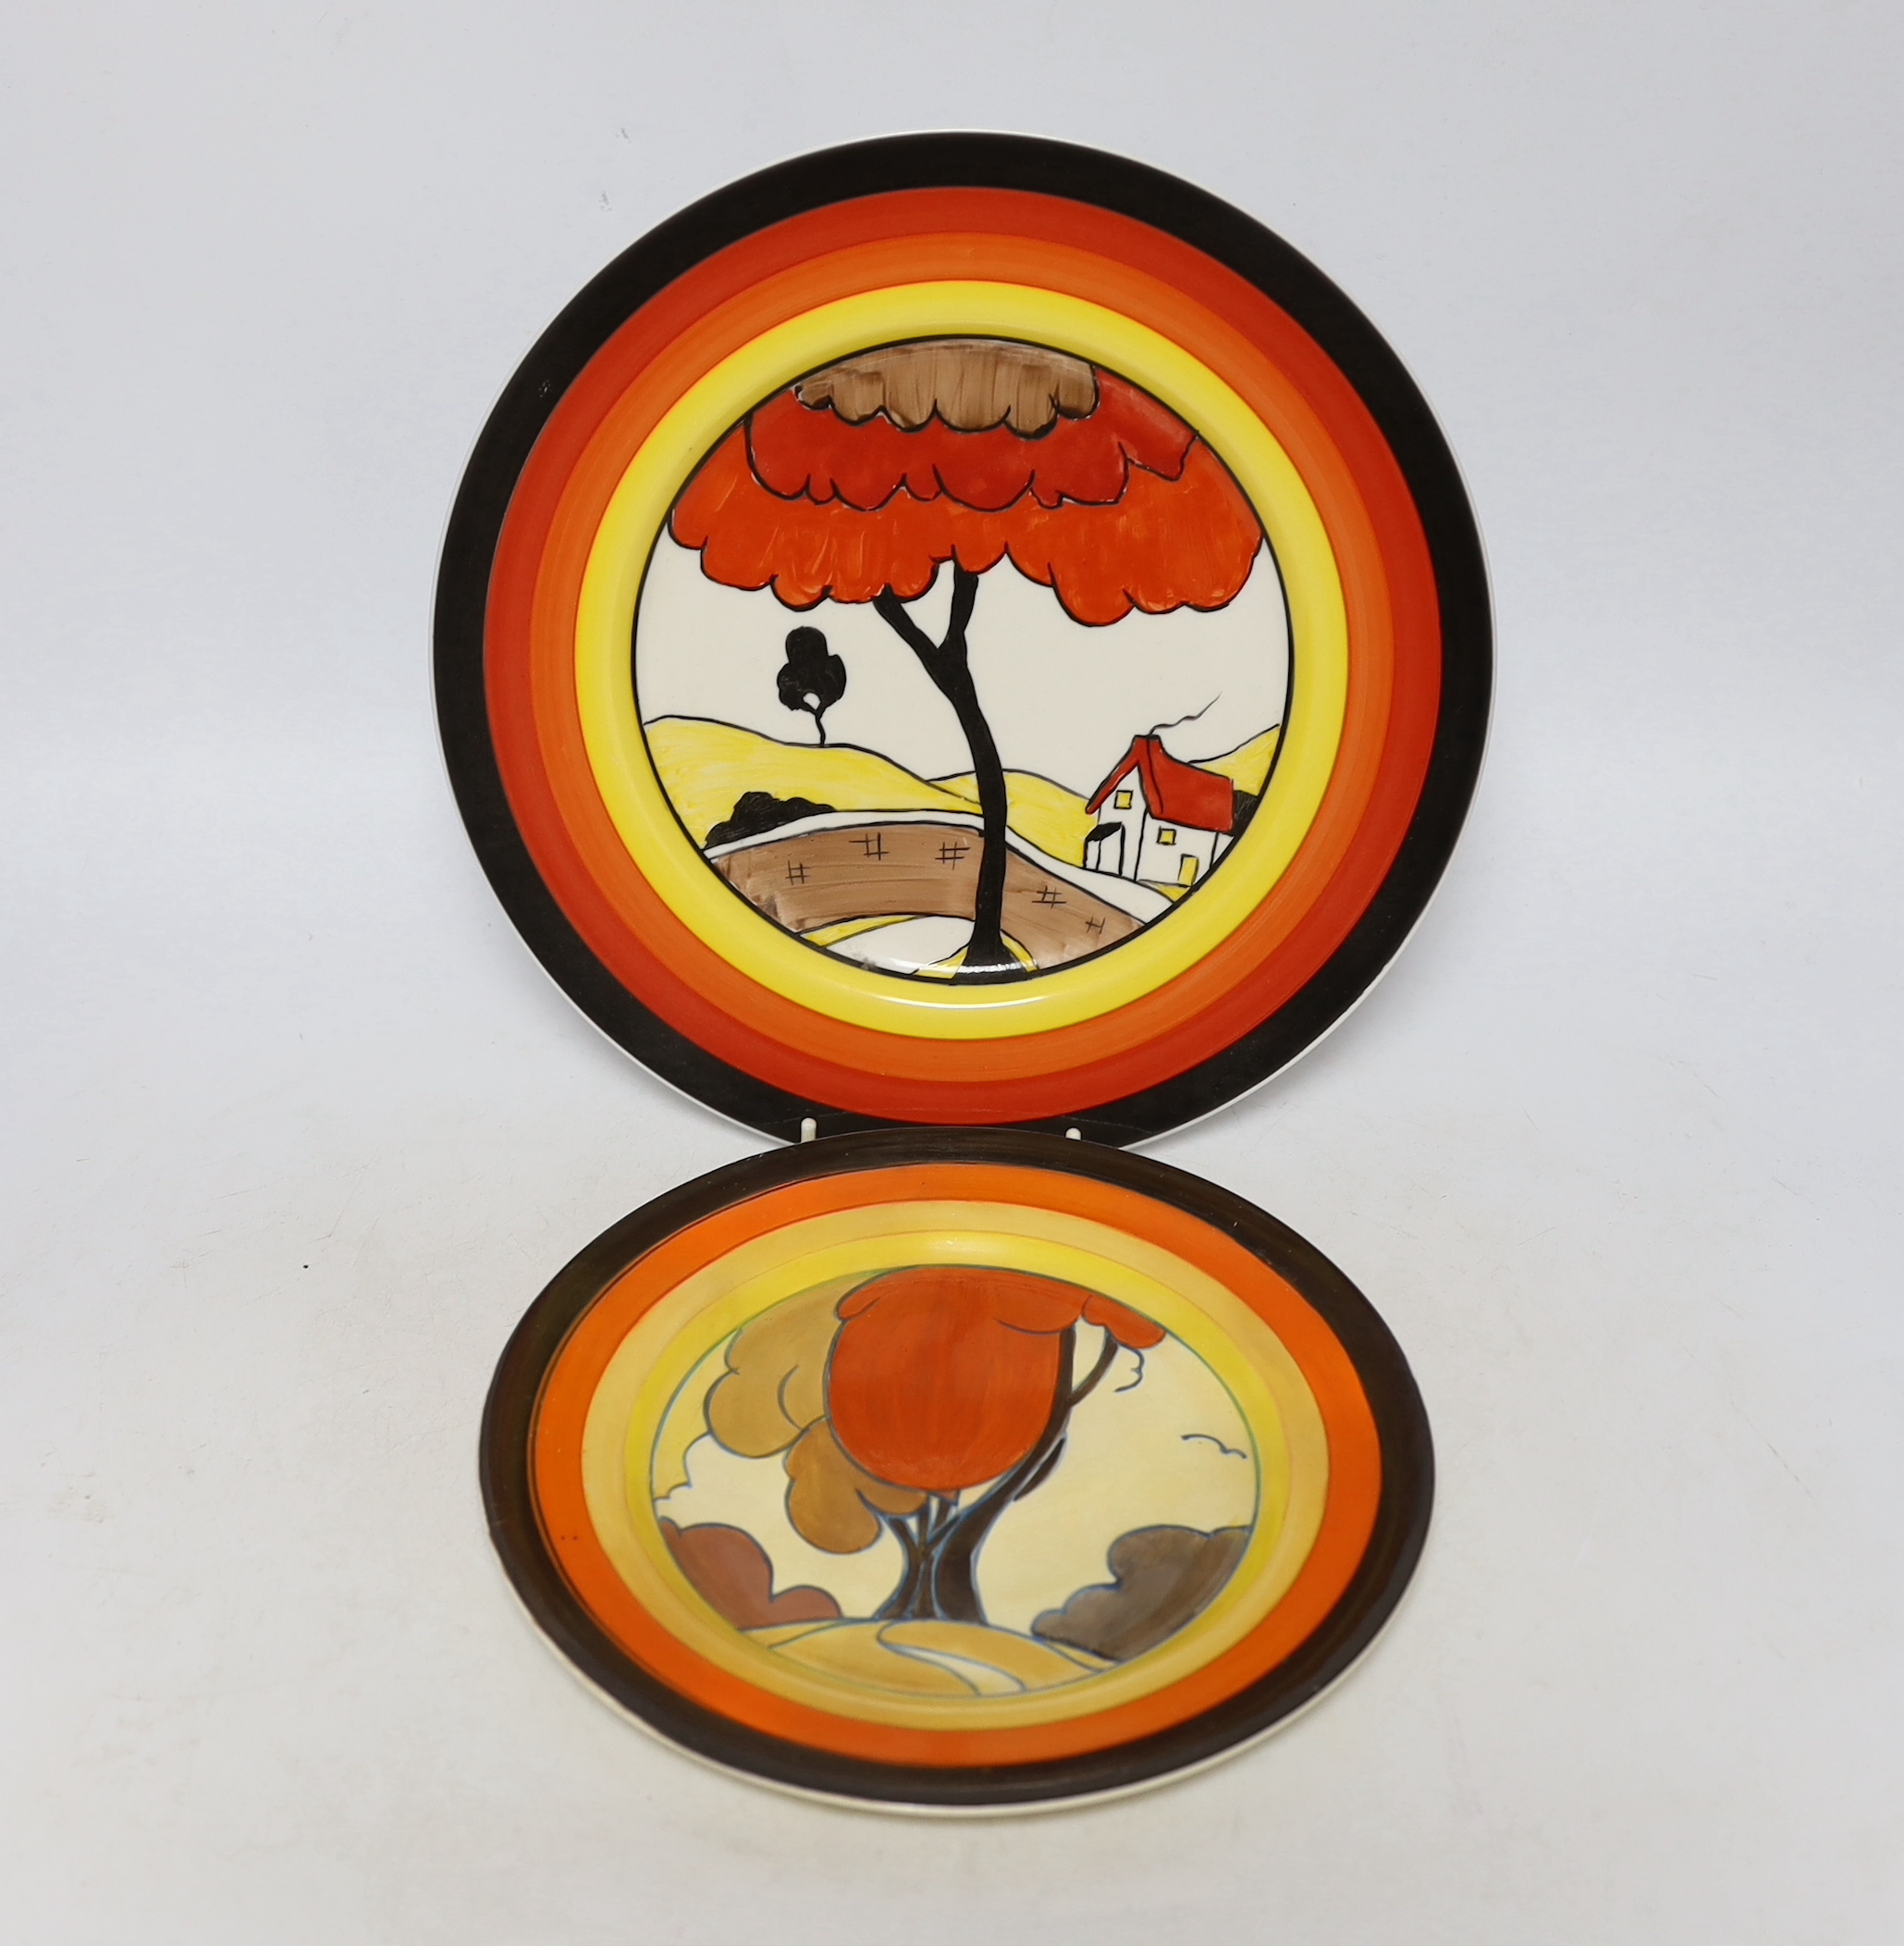 A Clarice Cliff 'Fantastisque' plate and another similar later Clarice Cliff style plate, largest 27cm diameter